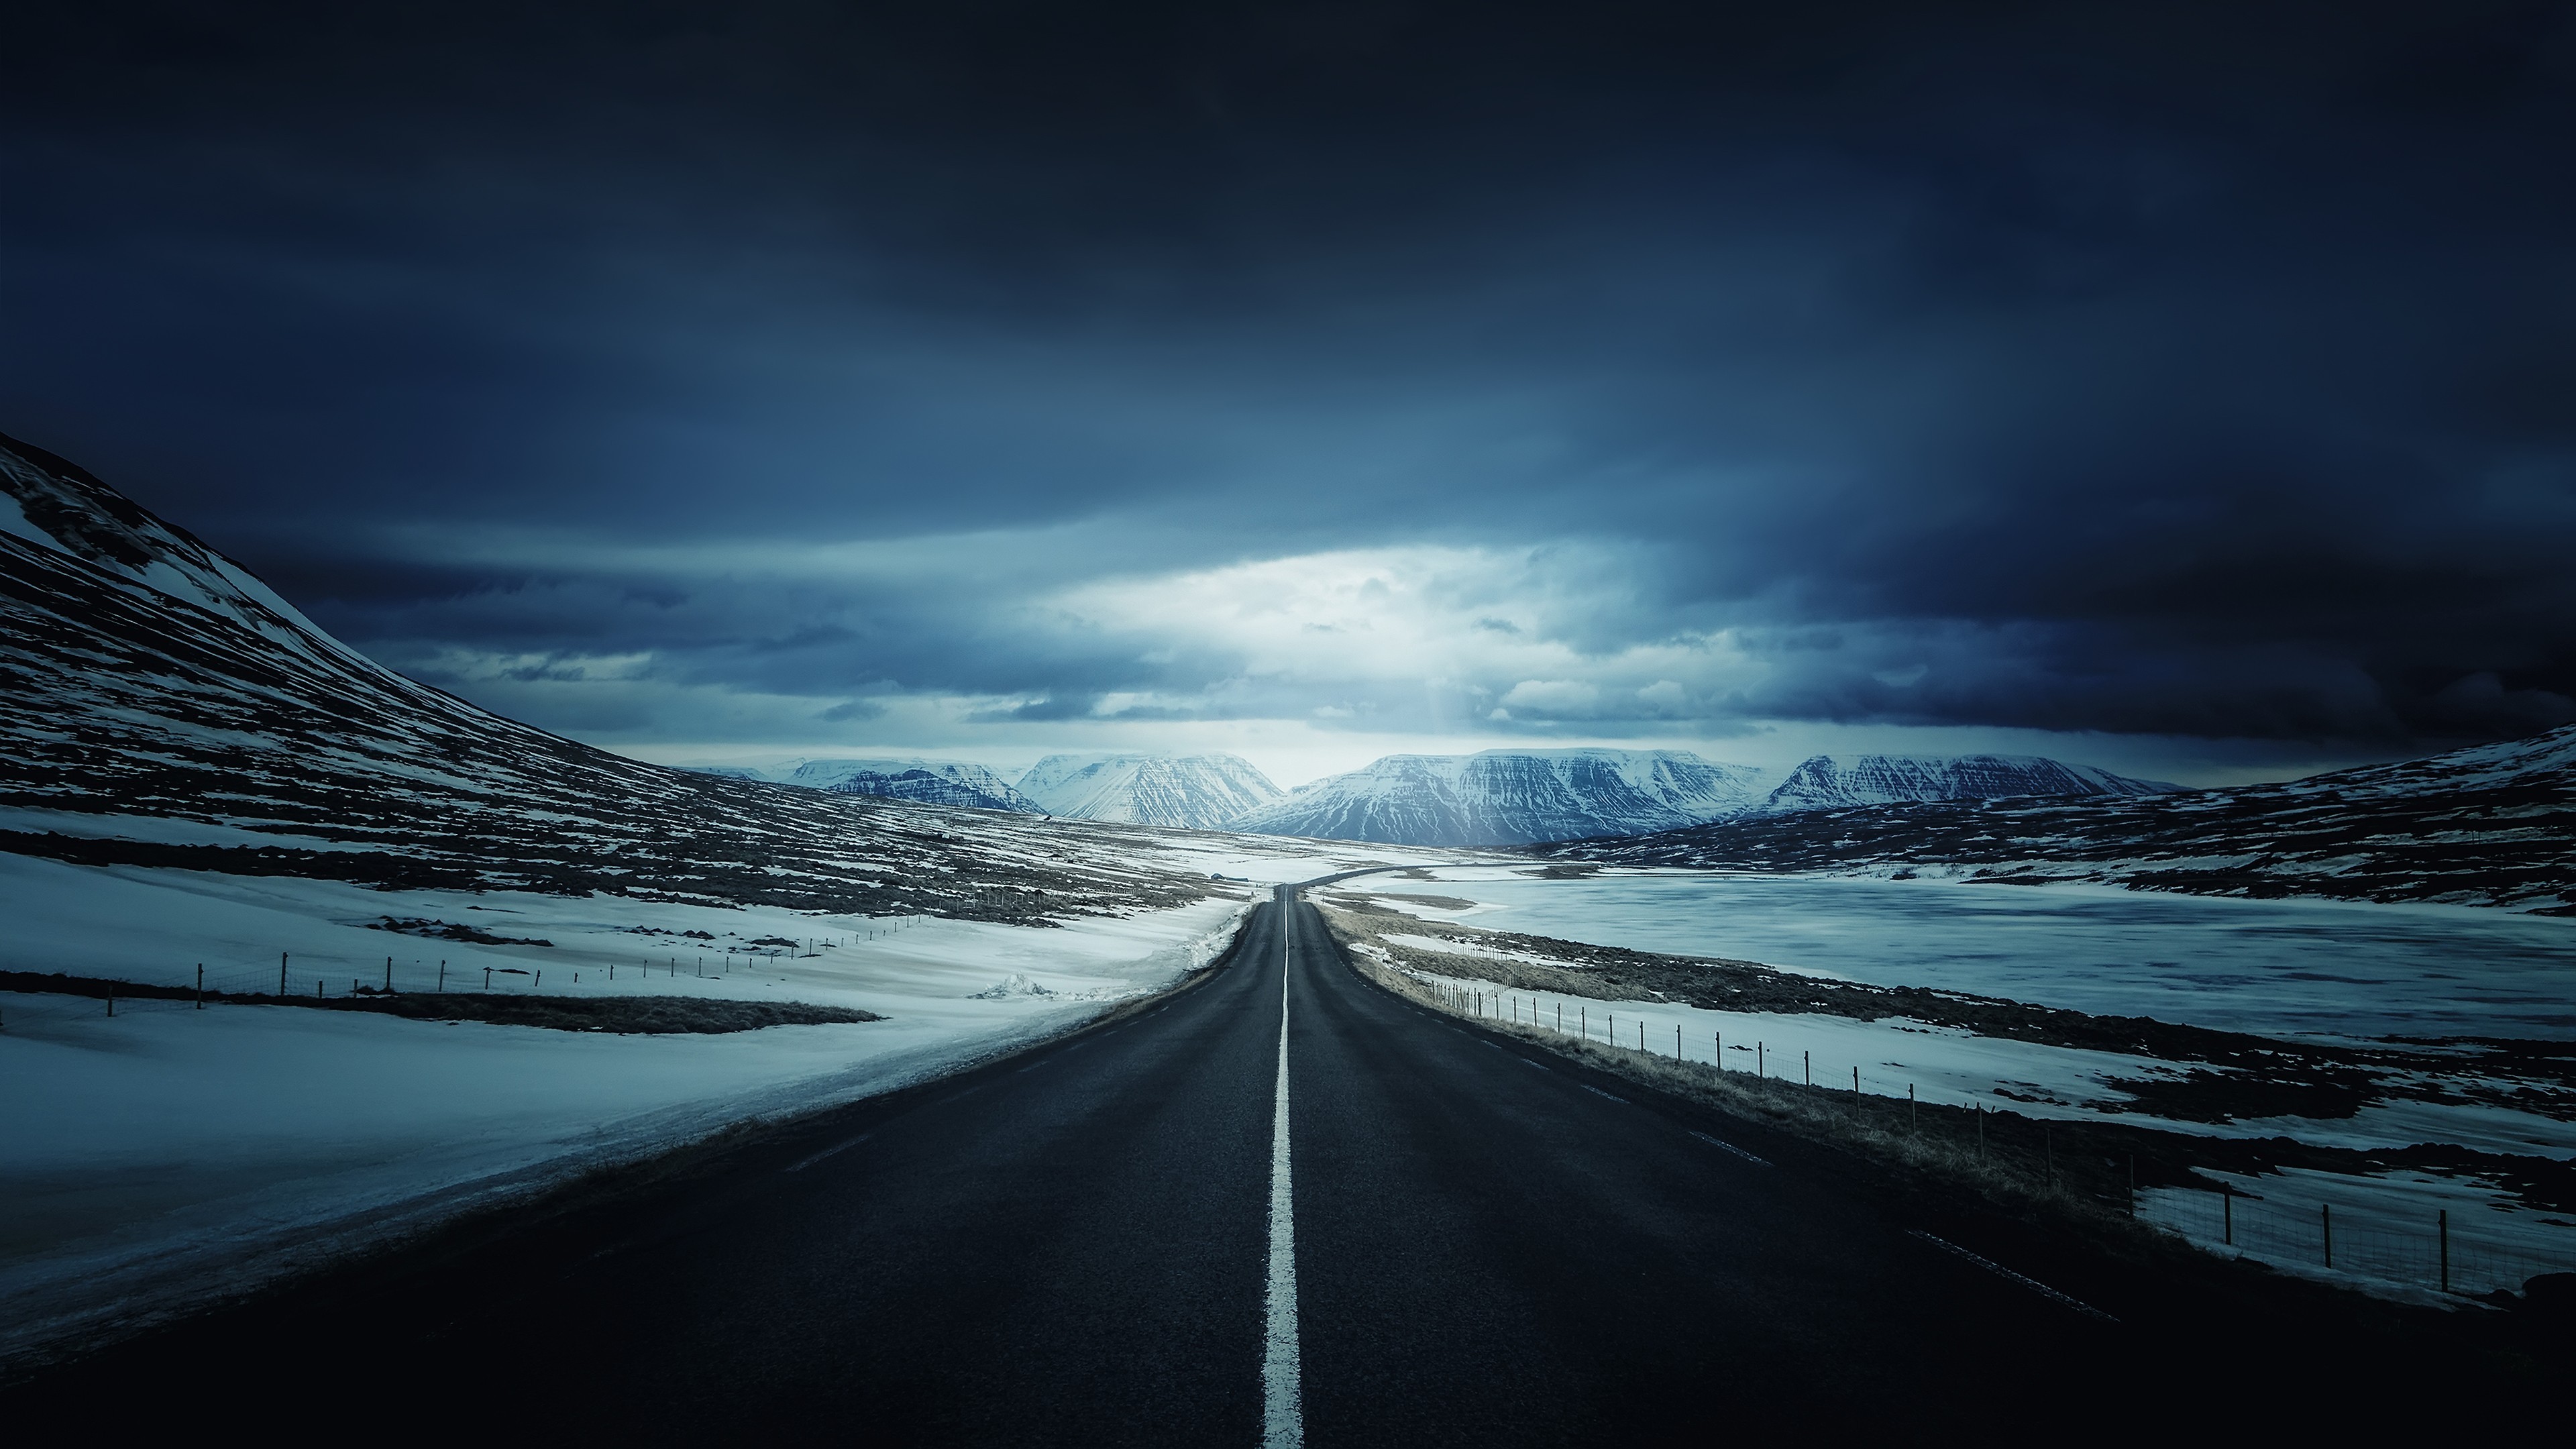 Wallpapers : landscape, nature, sky, snow, winter, road, ice, evening, morning, horizon, Arctic, highway, dusk, Freezing, infrastructure, cloud, tree, dawn, darkness, highland, 3840x2160 px, computer wallpaper, atmosphere of earth, mountain range, glacial